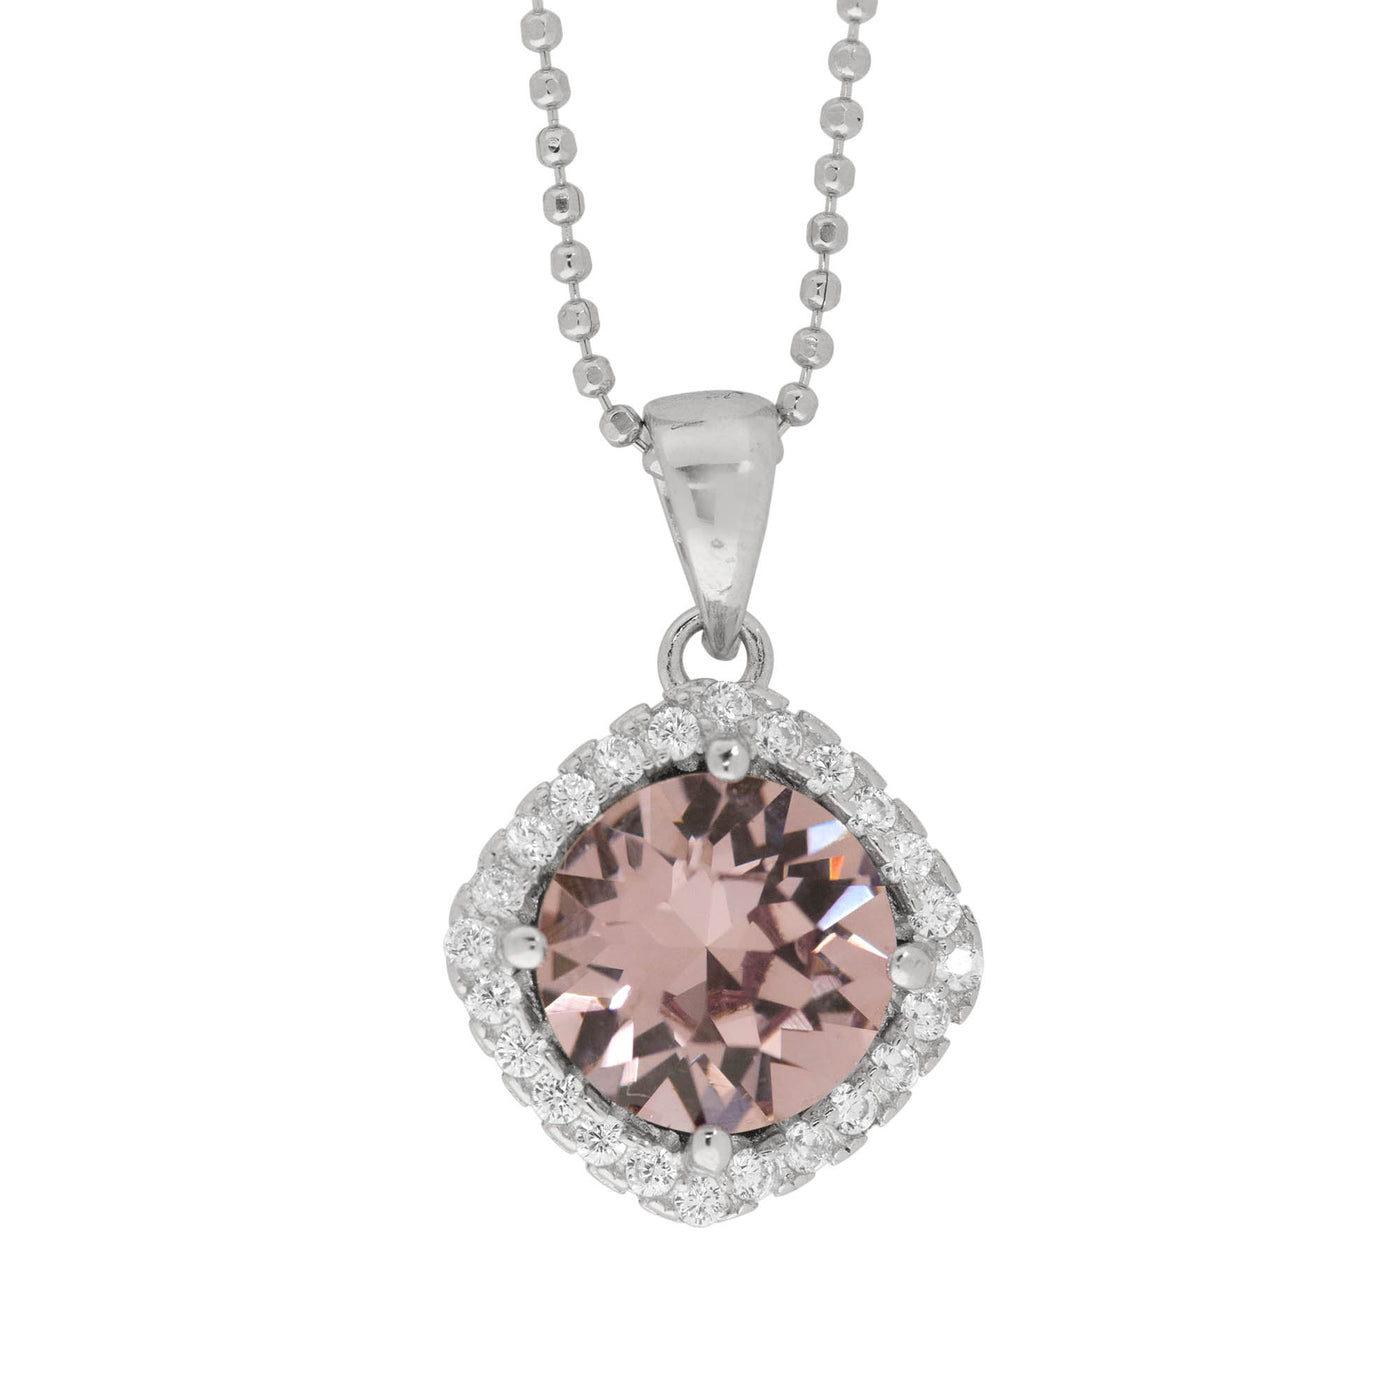 Rebecca Sloane Silver Pendant with Pave CZ and Light Amethyst